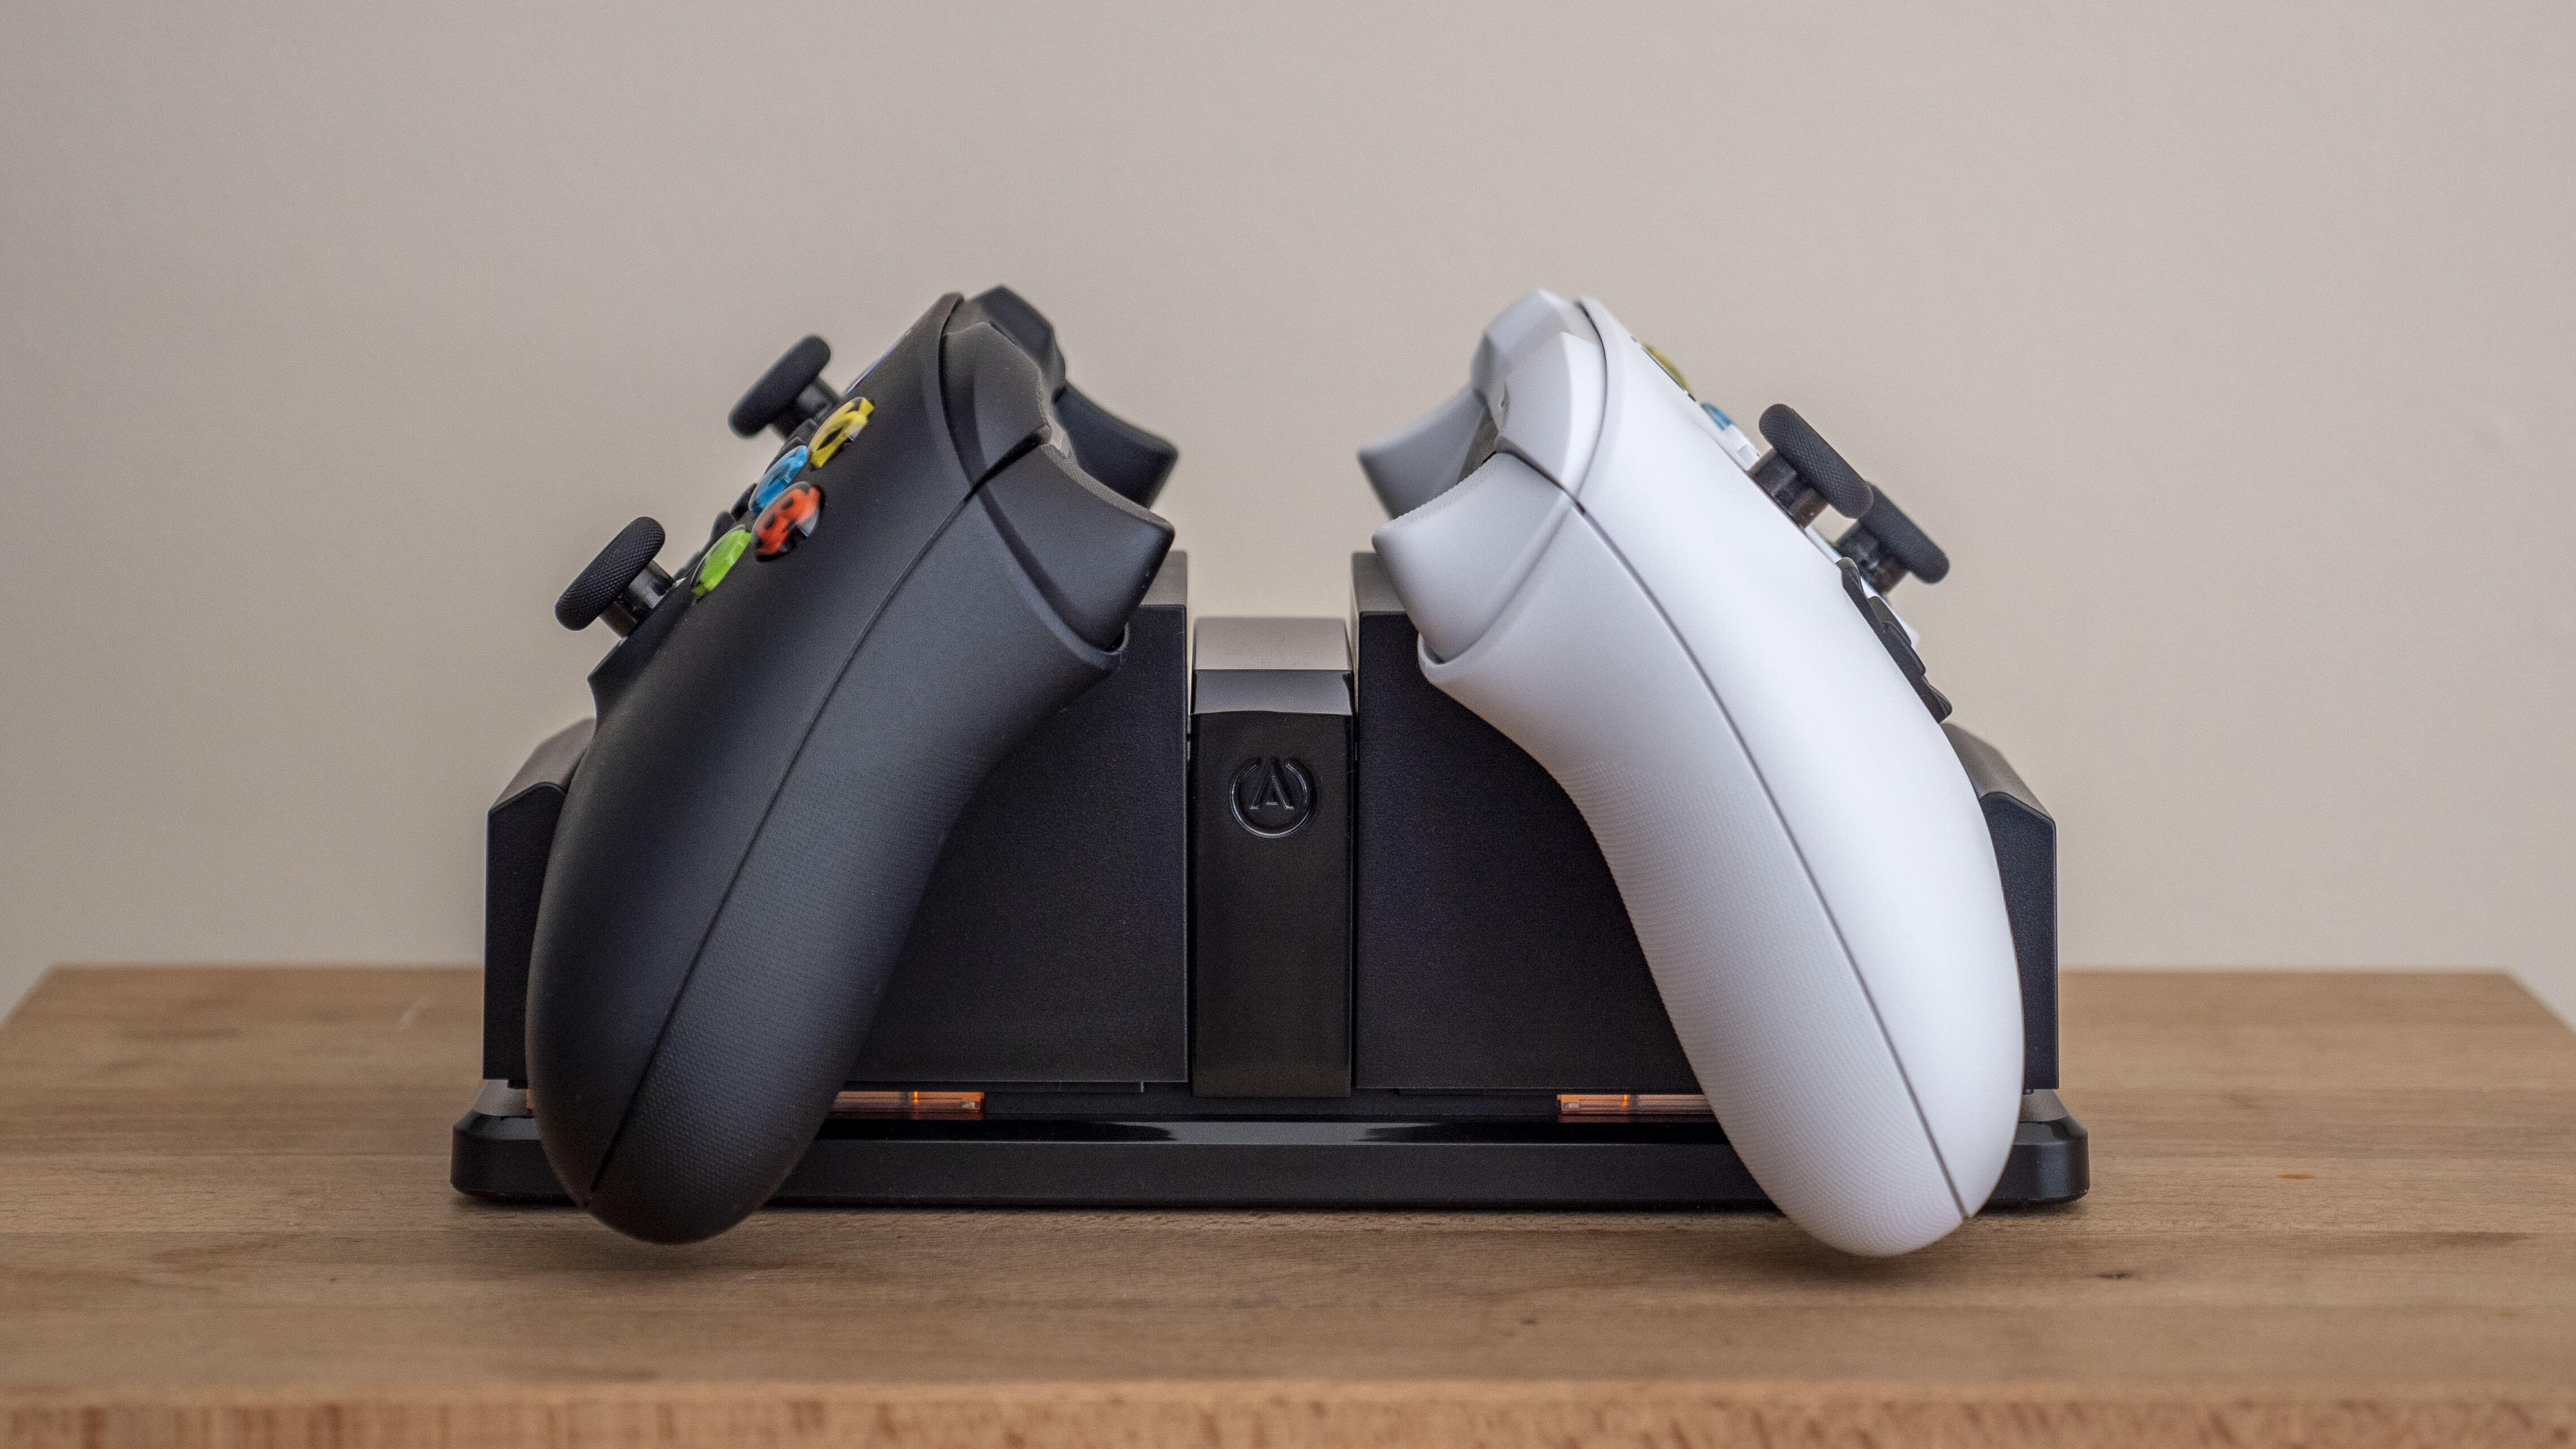 Best Xbox One accessories in 2023